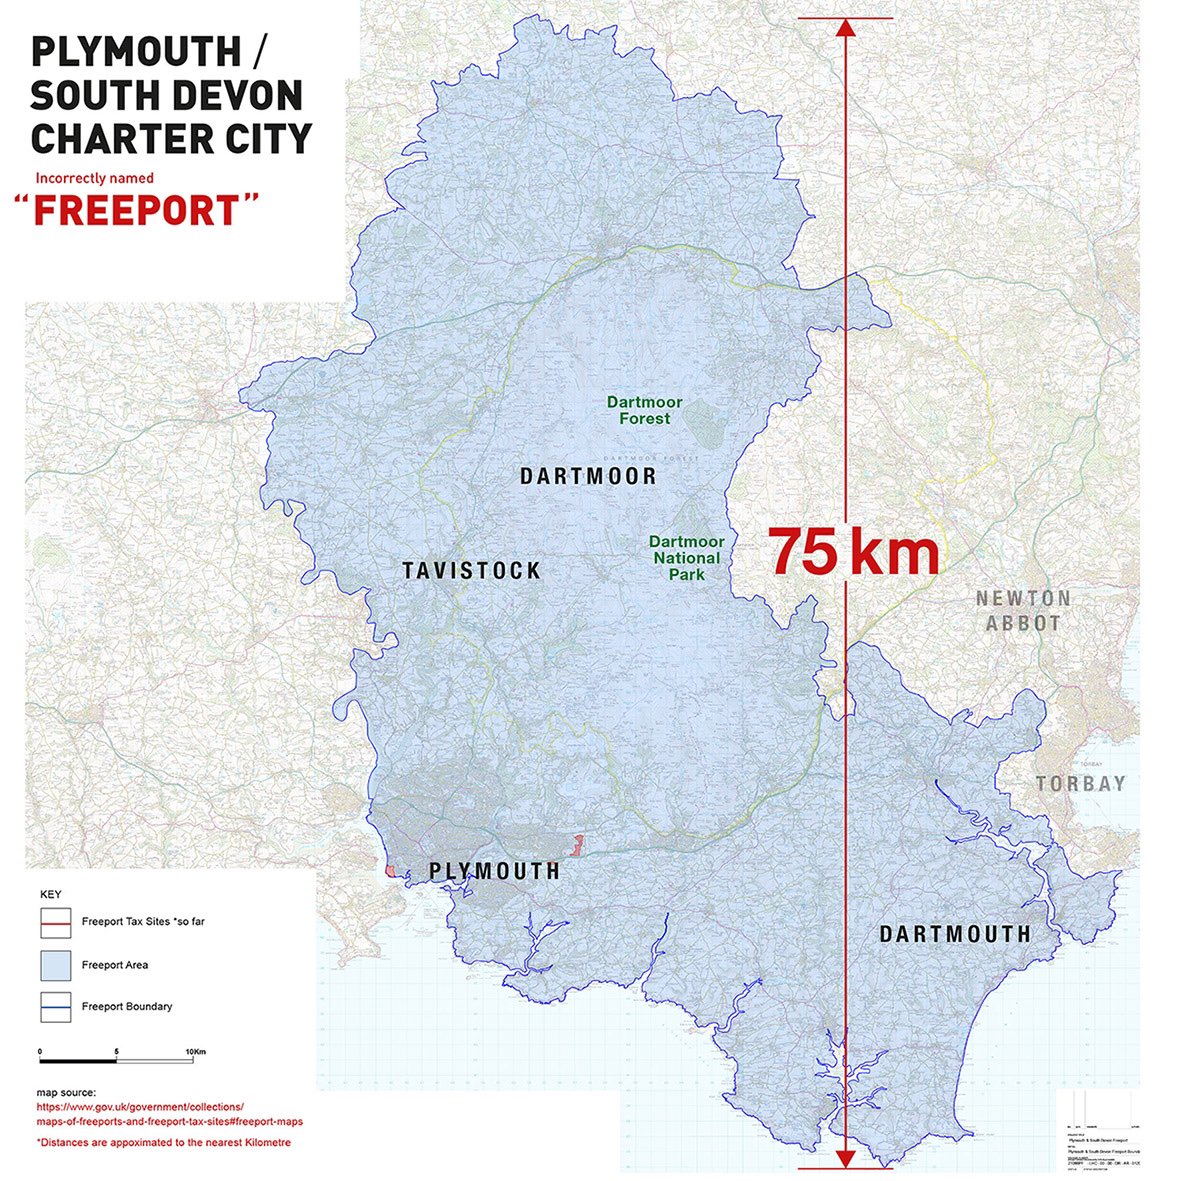 Govt. freeport maps lacked detail so I made these to show the sheer scale of these deregulation zones. Much extensive research on this and those involved done by @bakerstherald also condensed into some easy to read threads by @EuropeanPowell